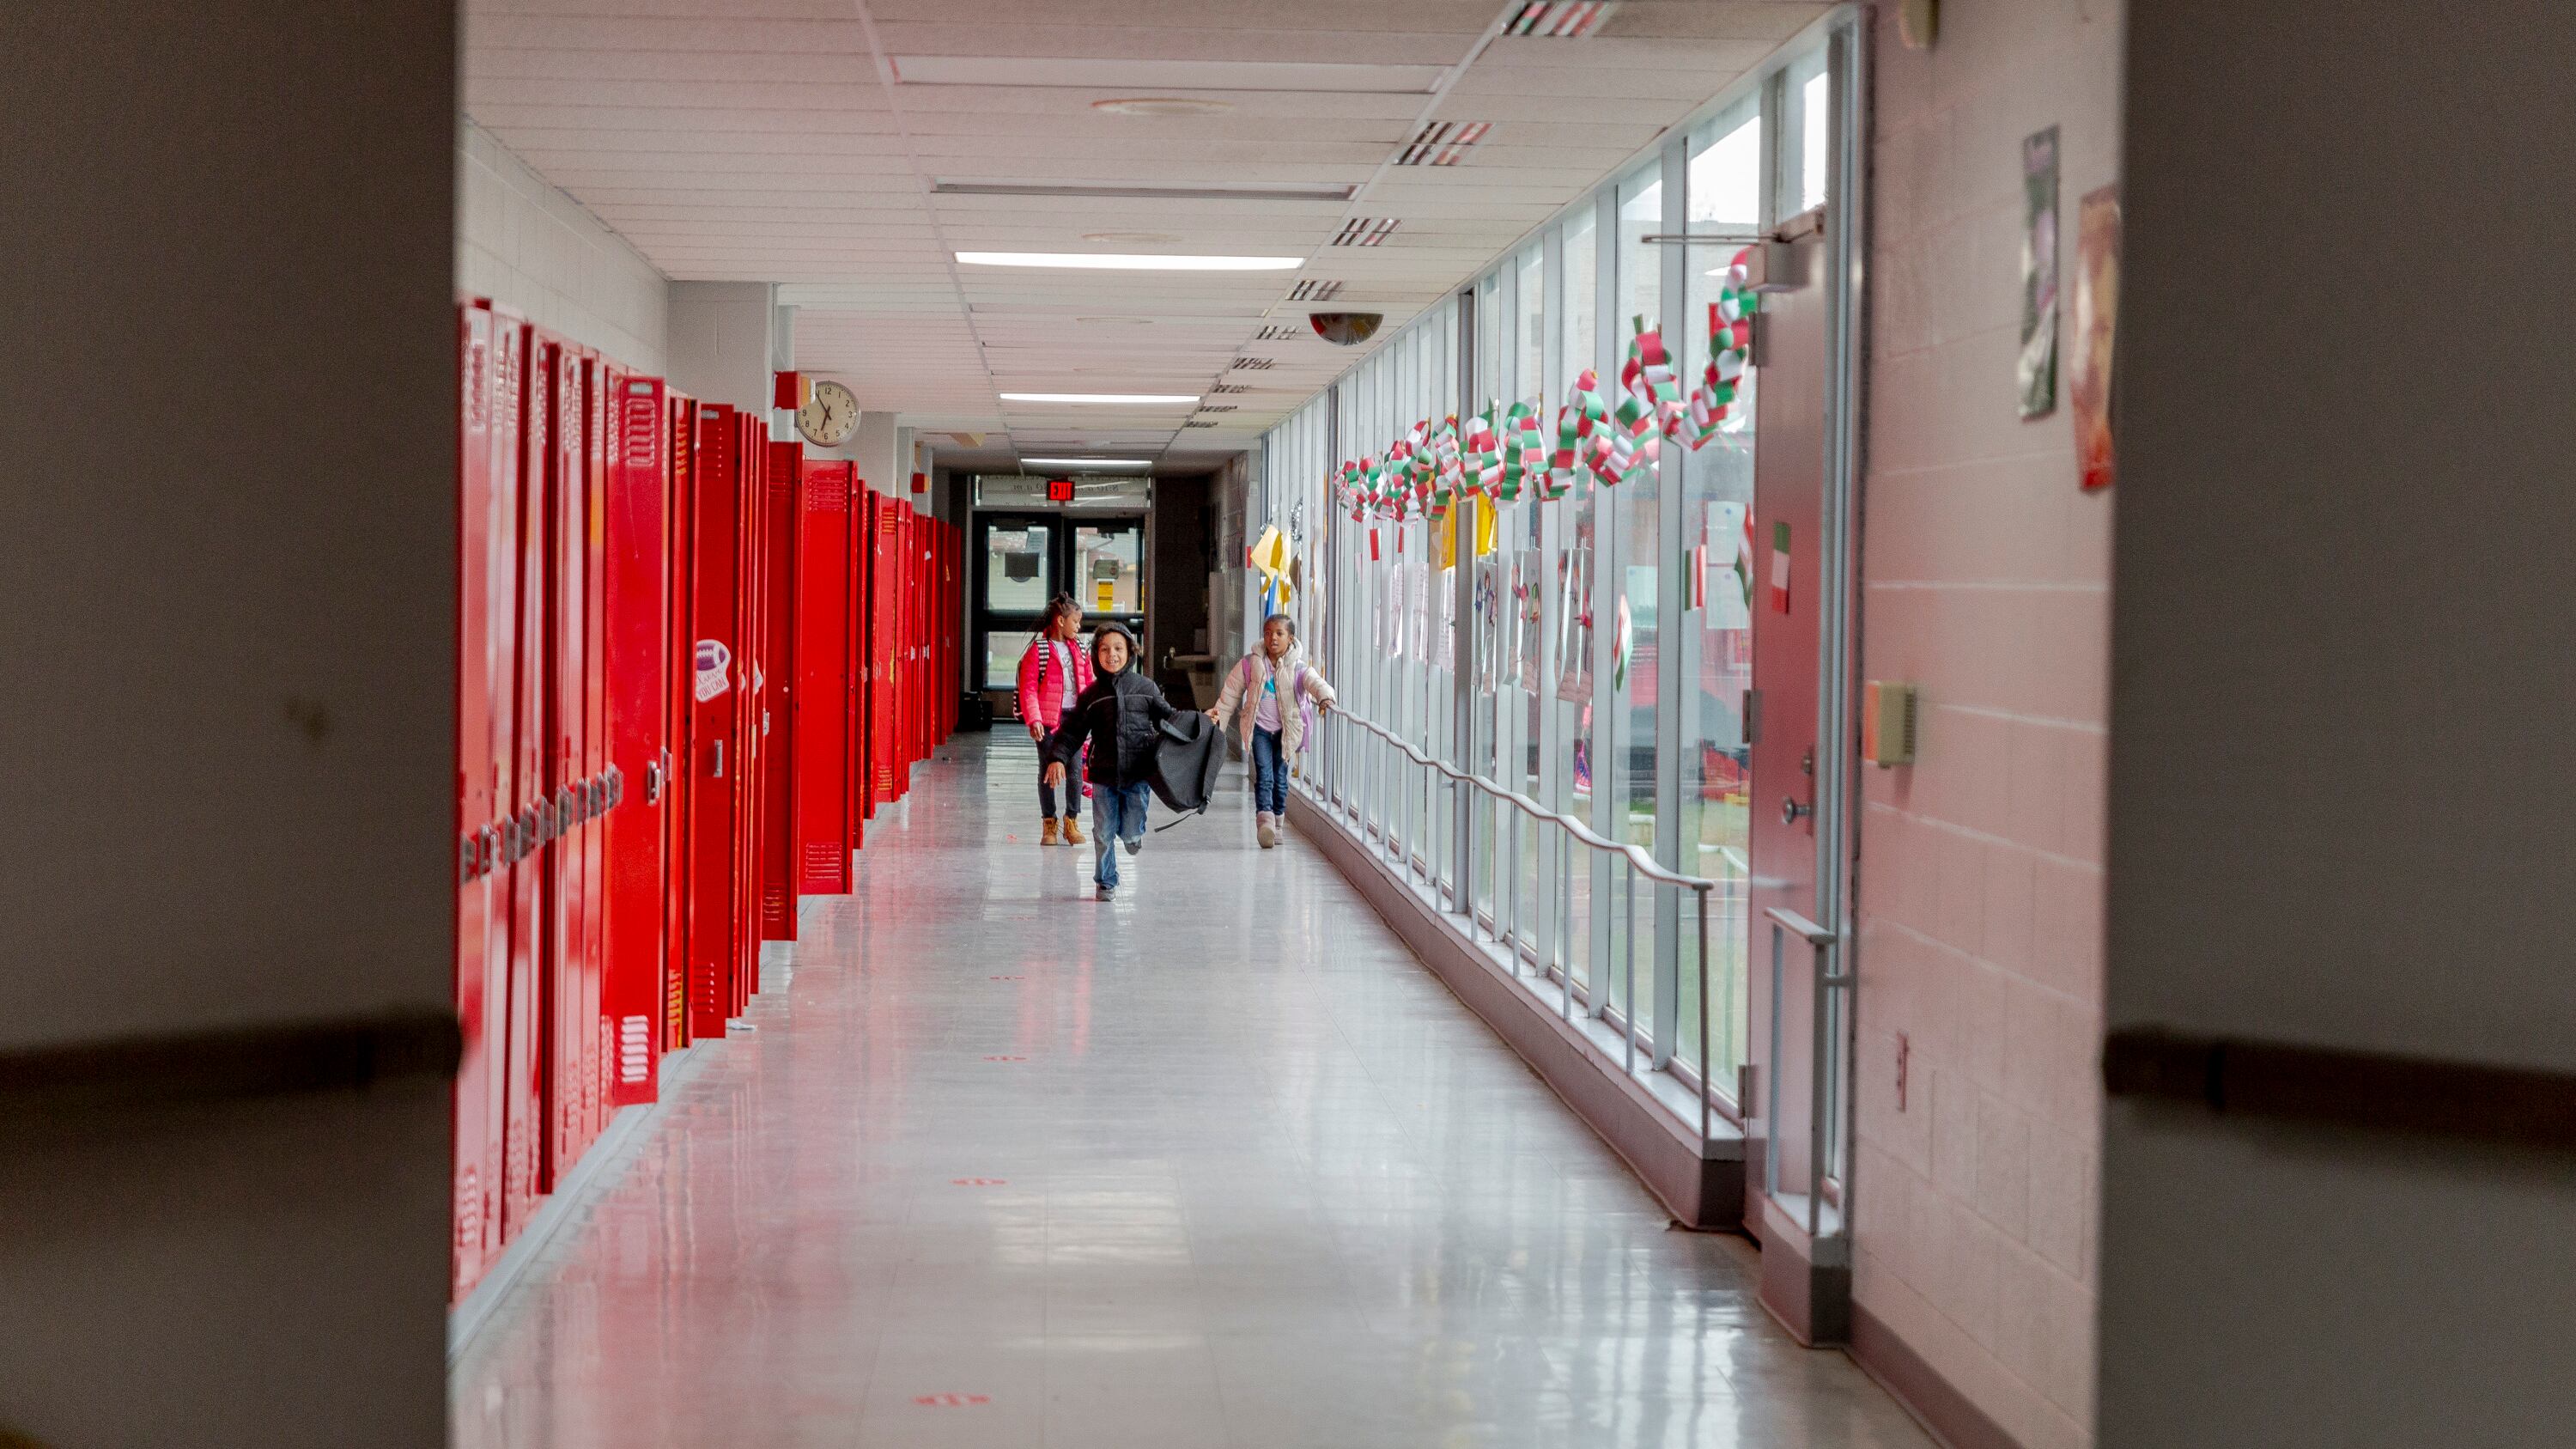 A view down a school hallway lined by red school lockers. The hallway is mostly empty, but a few students are visible in the distance.